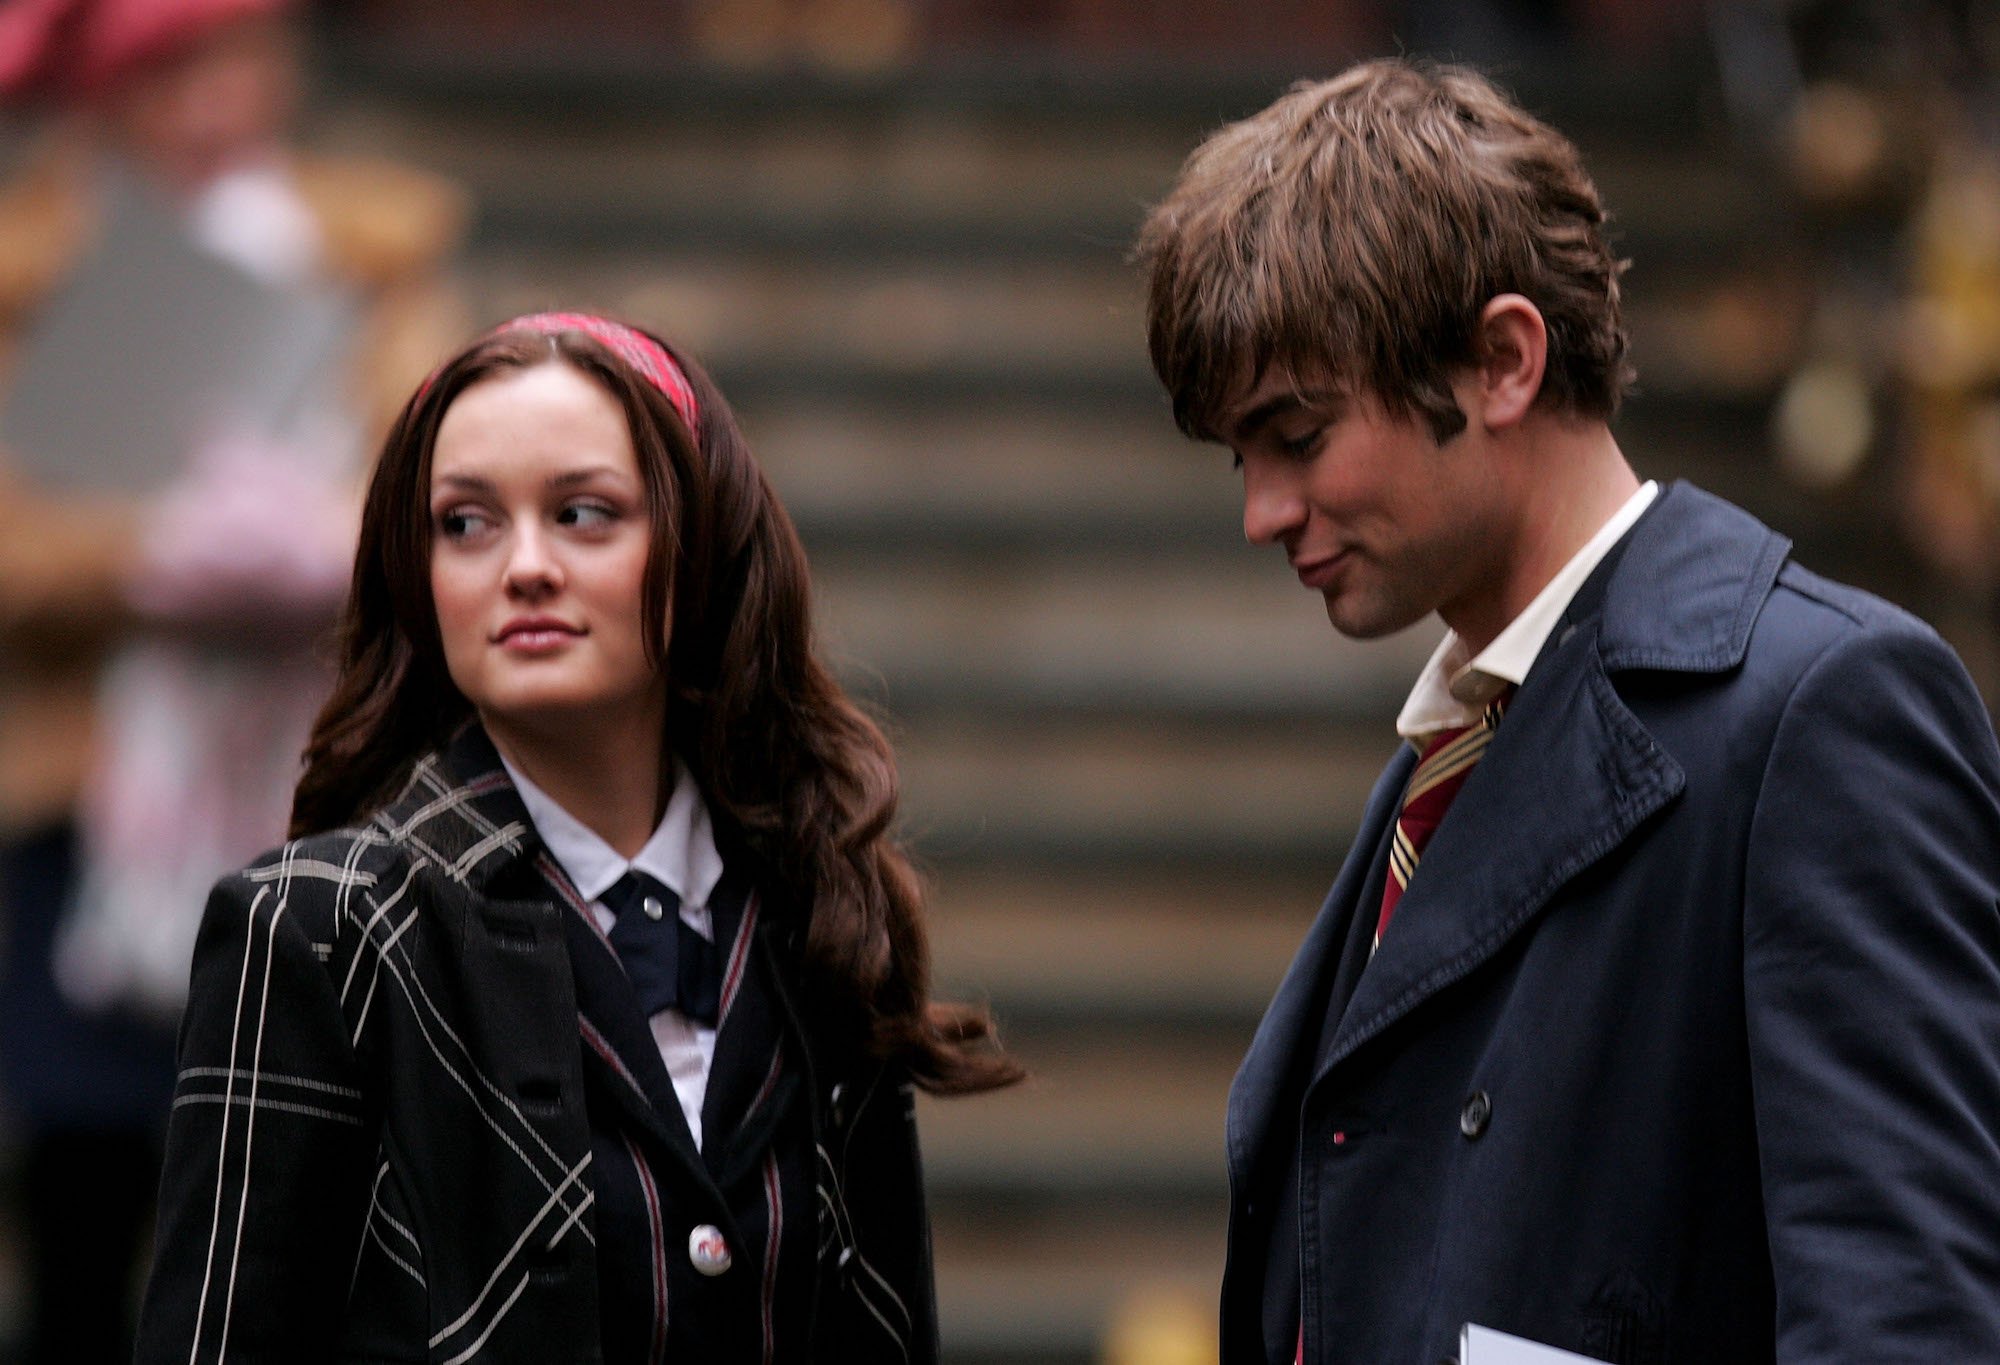 (L-R) Leighton Meester as Blair Waldorf and Chace Crawford as Nate Archibald on set of 'Gossip Girl'